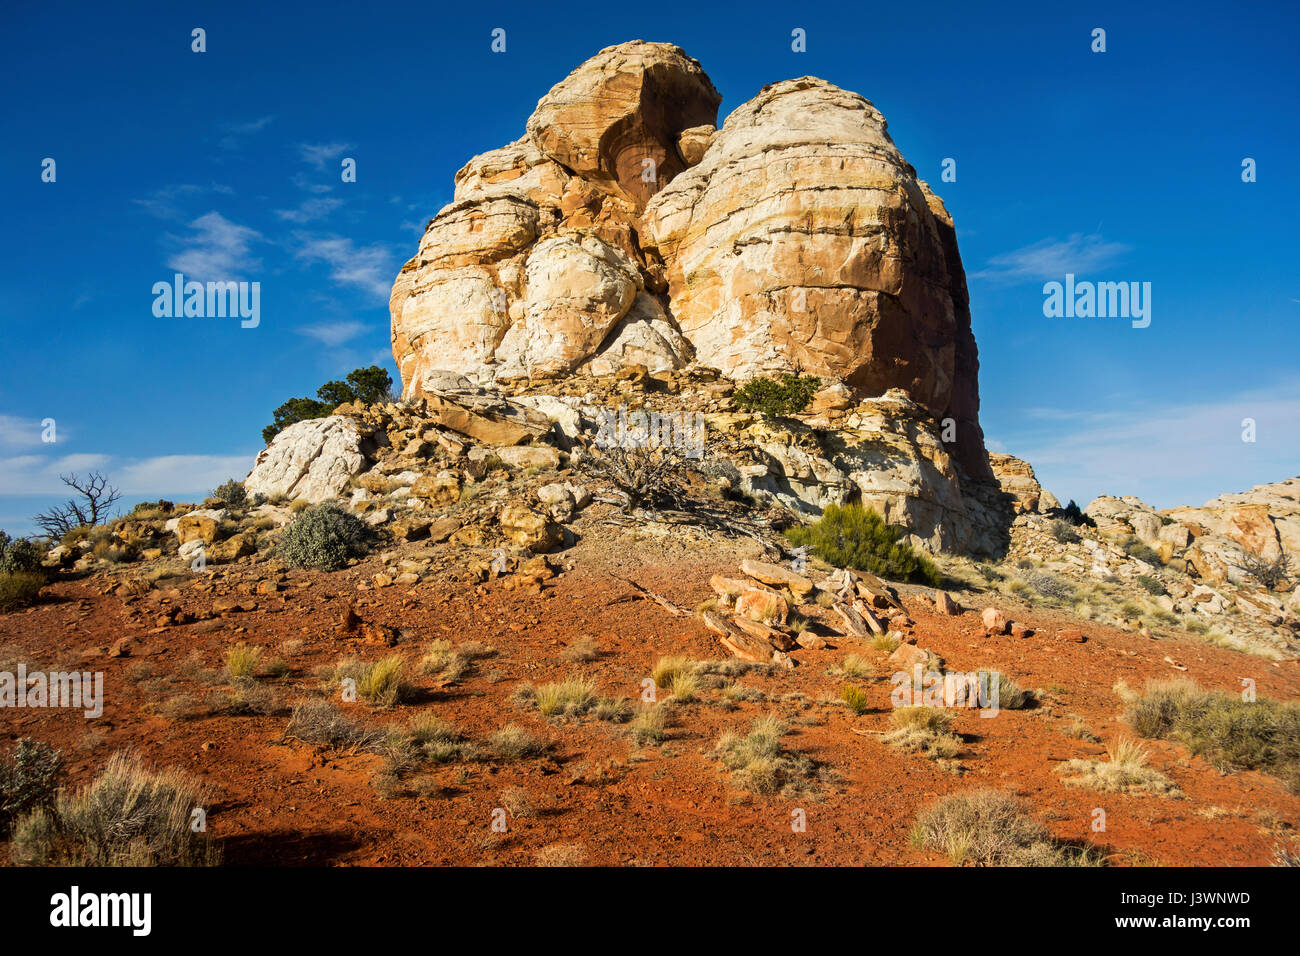 Navajo Knobs Dual Rock Formation. Scenic Red Earth Blue Skyline Desert Landscape View. Capitol Reef National Park Utah Southwest United States Stock Photo